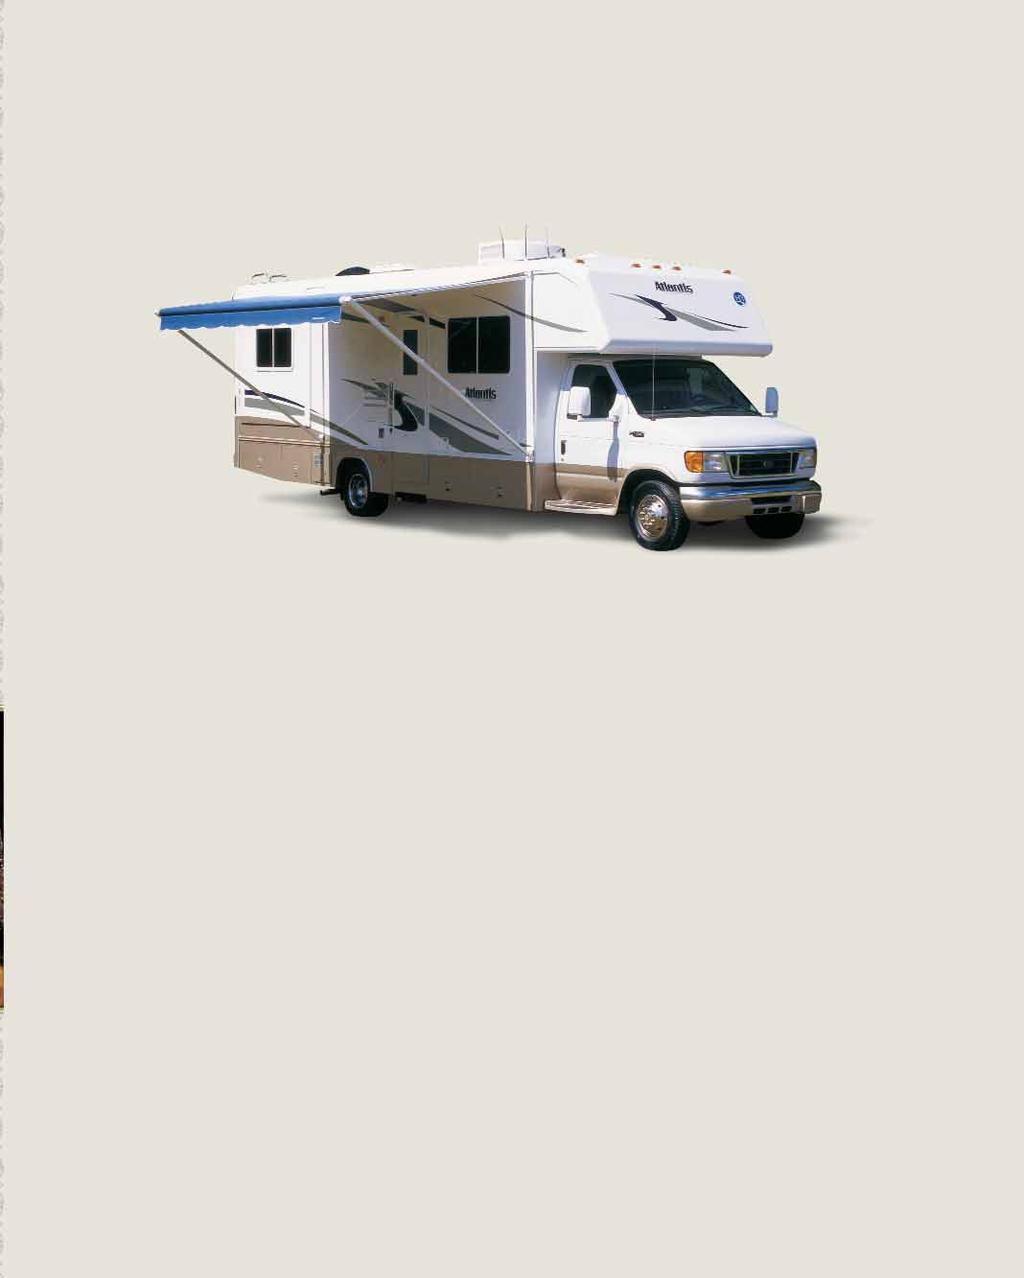 2005 ATLANTIS E ASY DRIVING. EASY LIVING. Meet the mini motorhome that s mighty big on features the 2005 Atlantis.